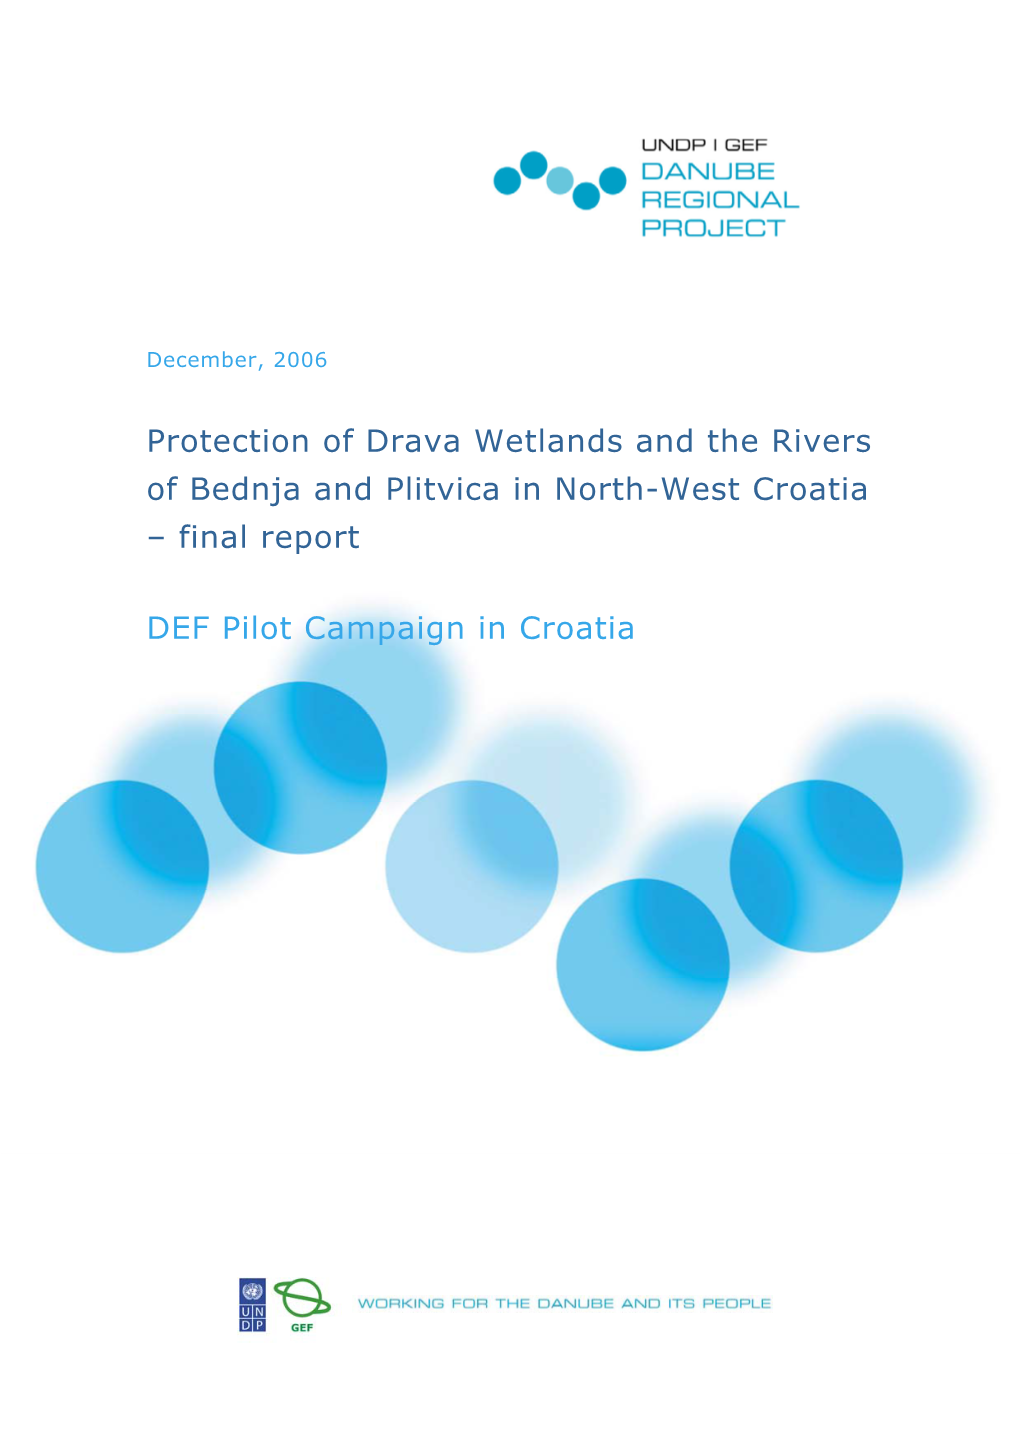 Protection of Drava Wetlands and the Rivers of Bednja and Plitvica in North-West Croatia – Final Report